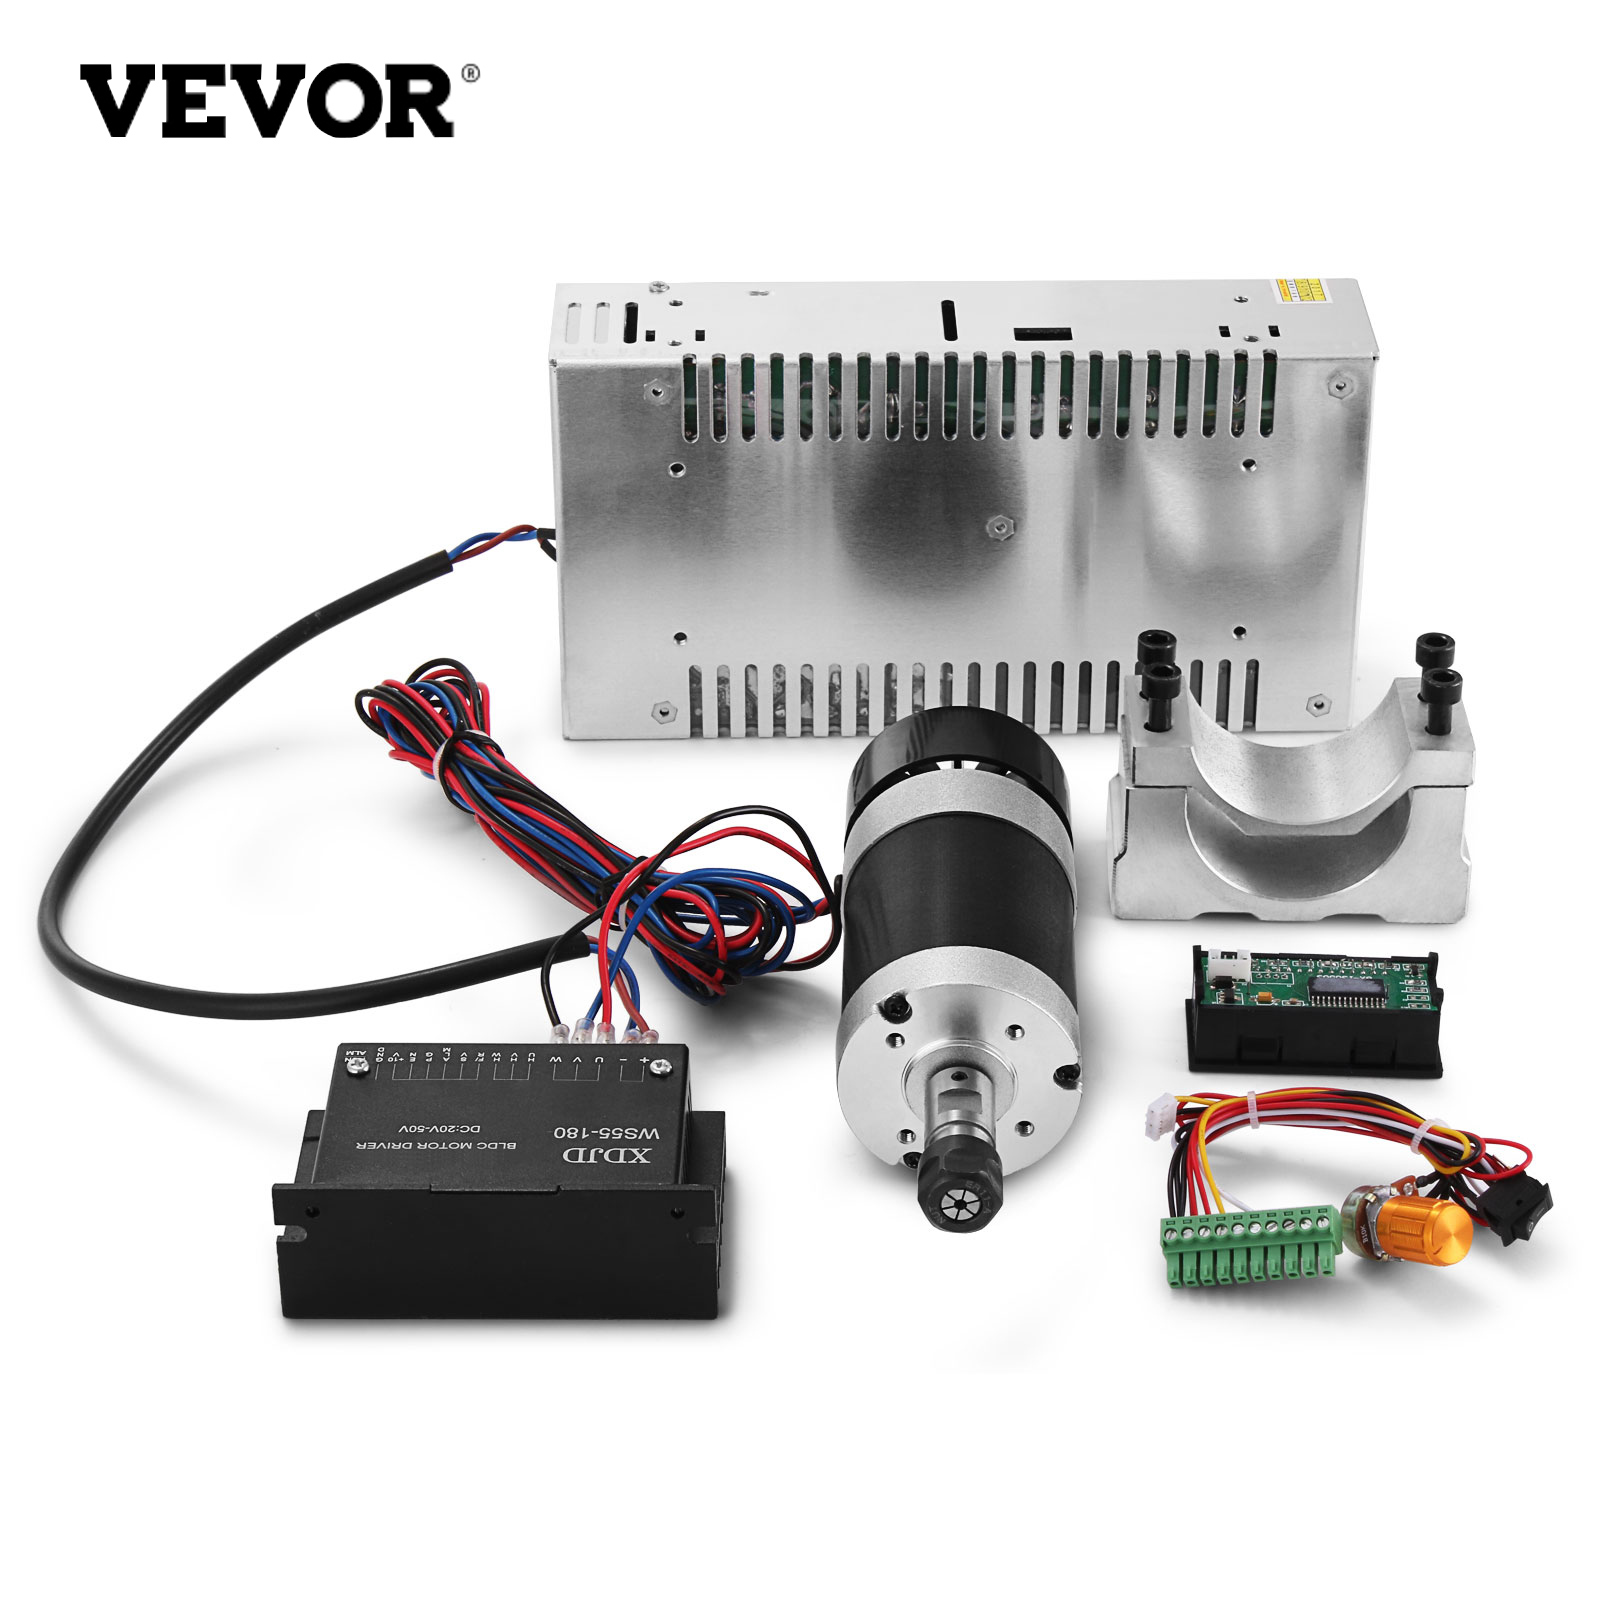 Cnc 400w Brushless Spindle Motor & Speed Controller & Mount + 600w Psu Us Stock от Vevor Many GEOs